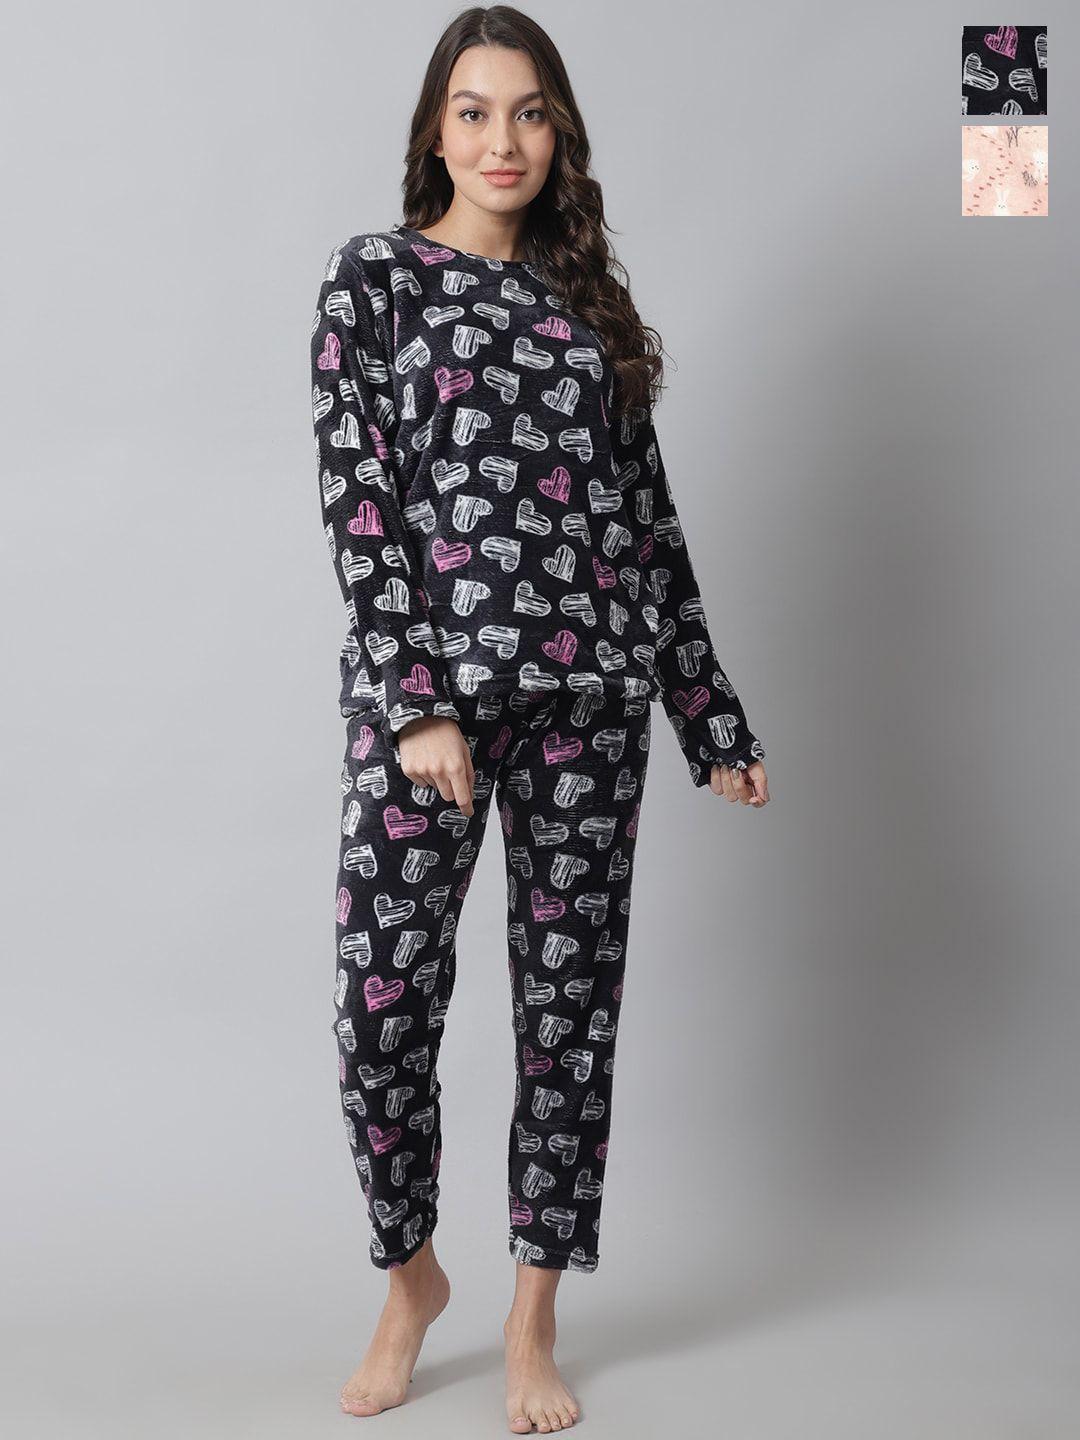 tag 7 pack of 2 conversational printed woollen night suits